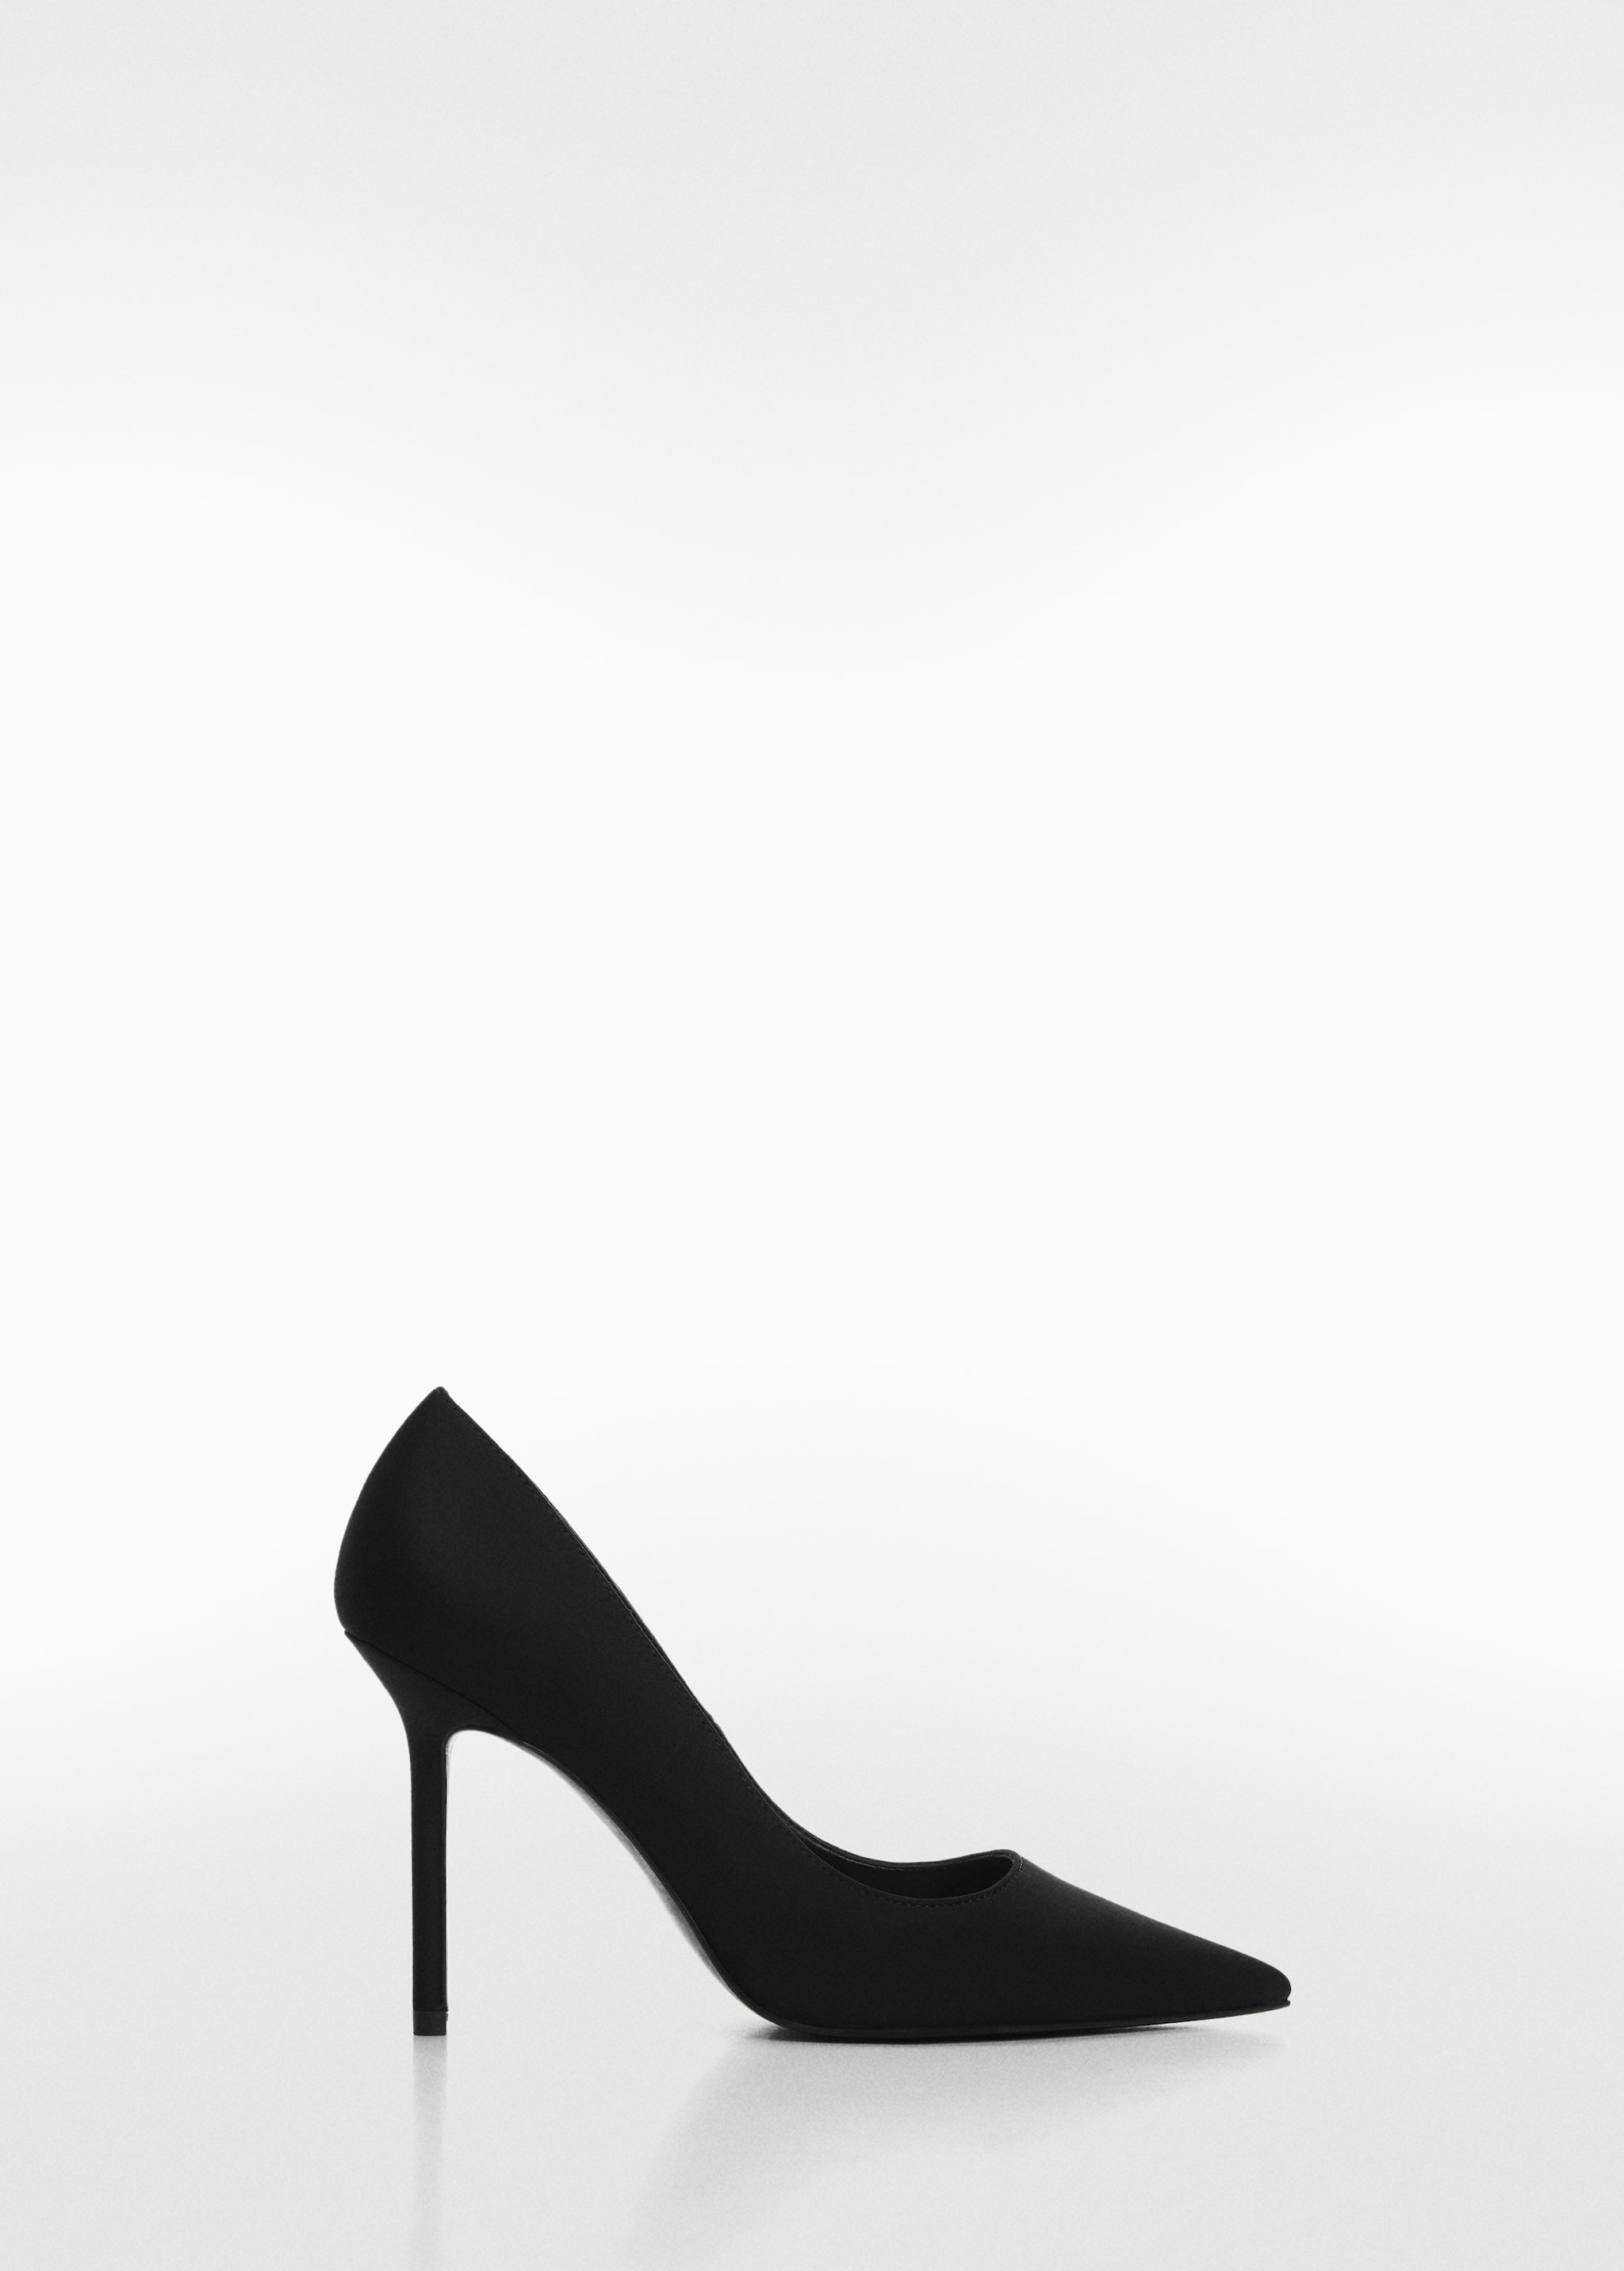 Pointed toe heel shoes - Article without model